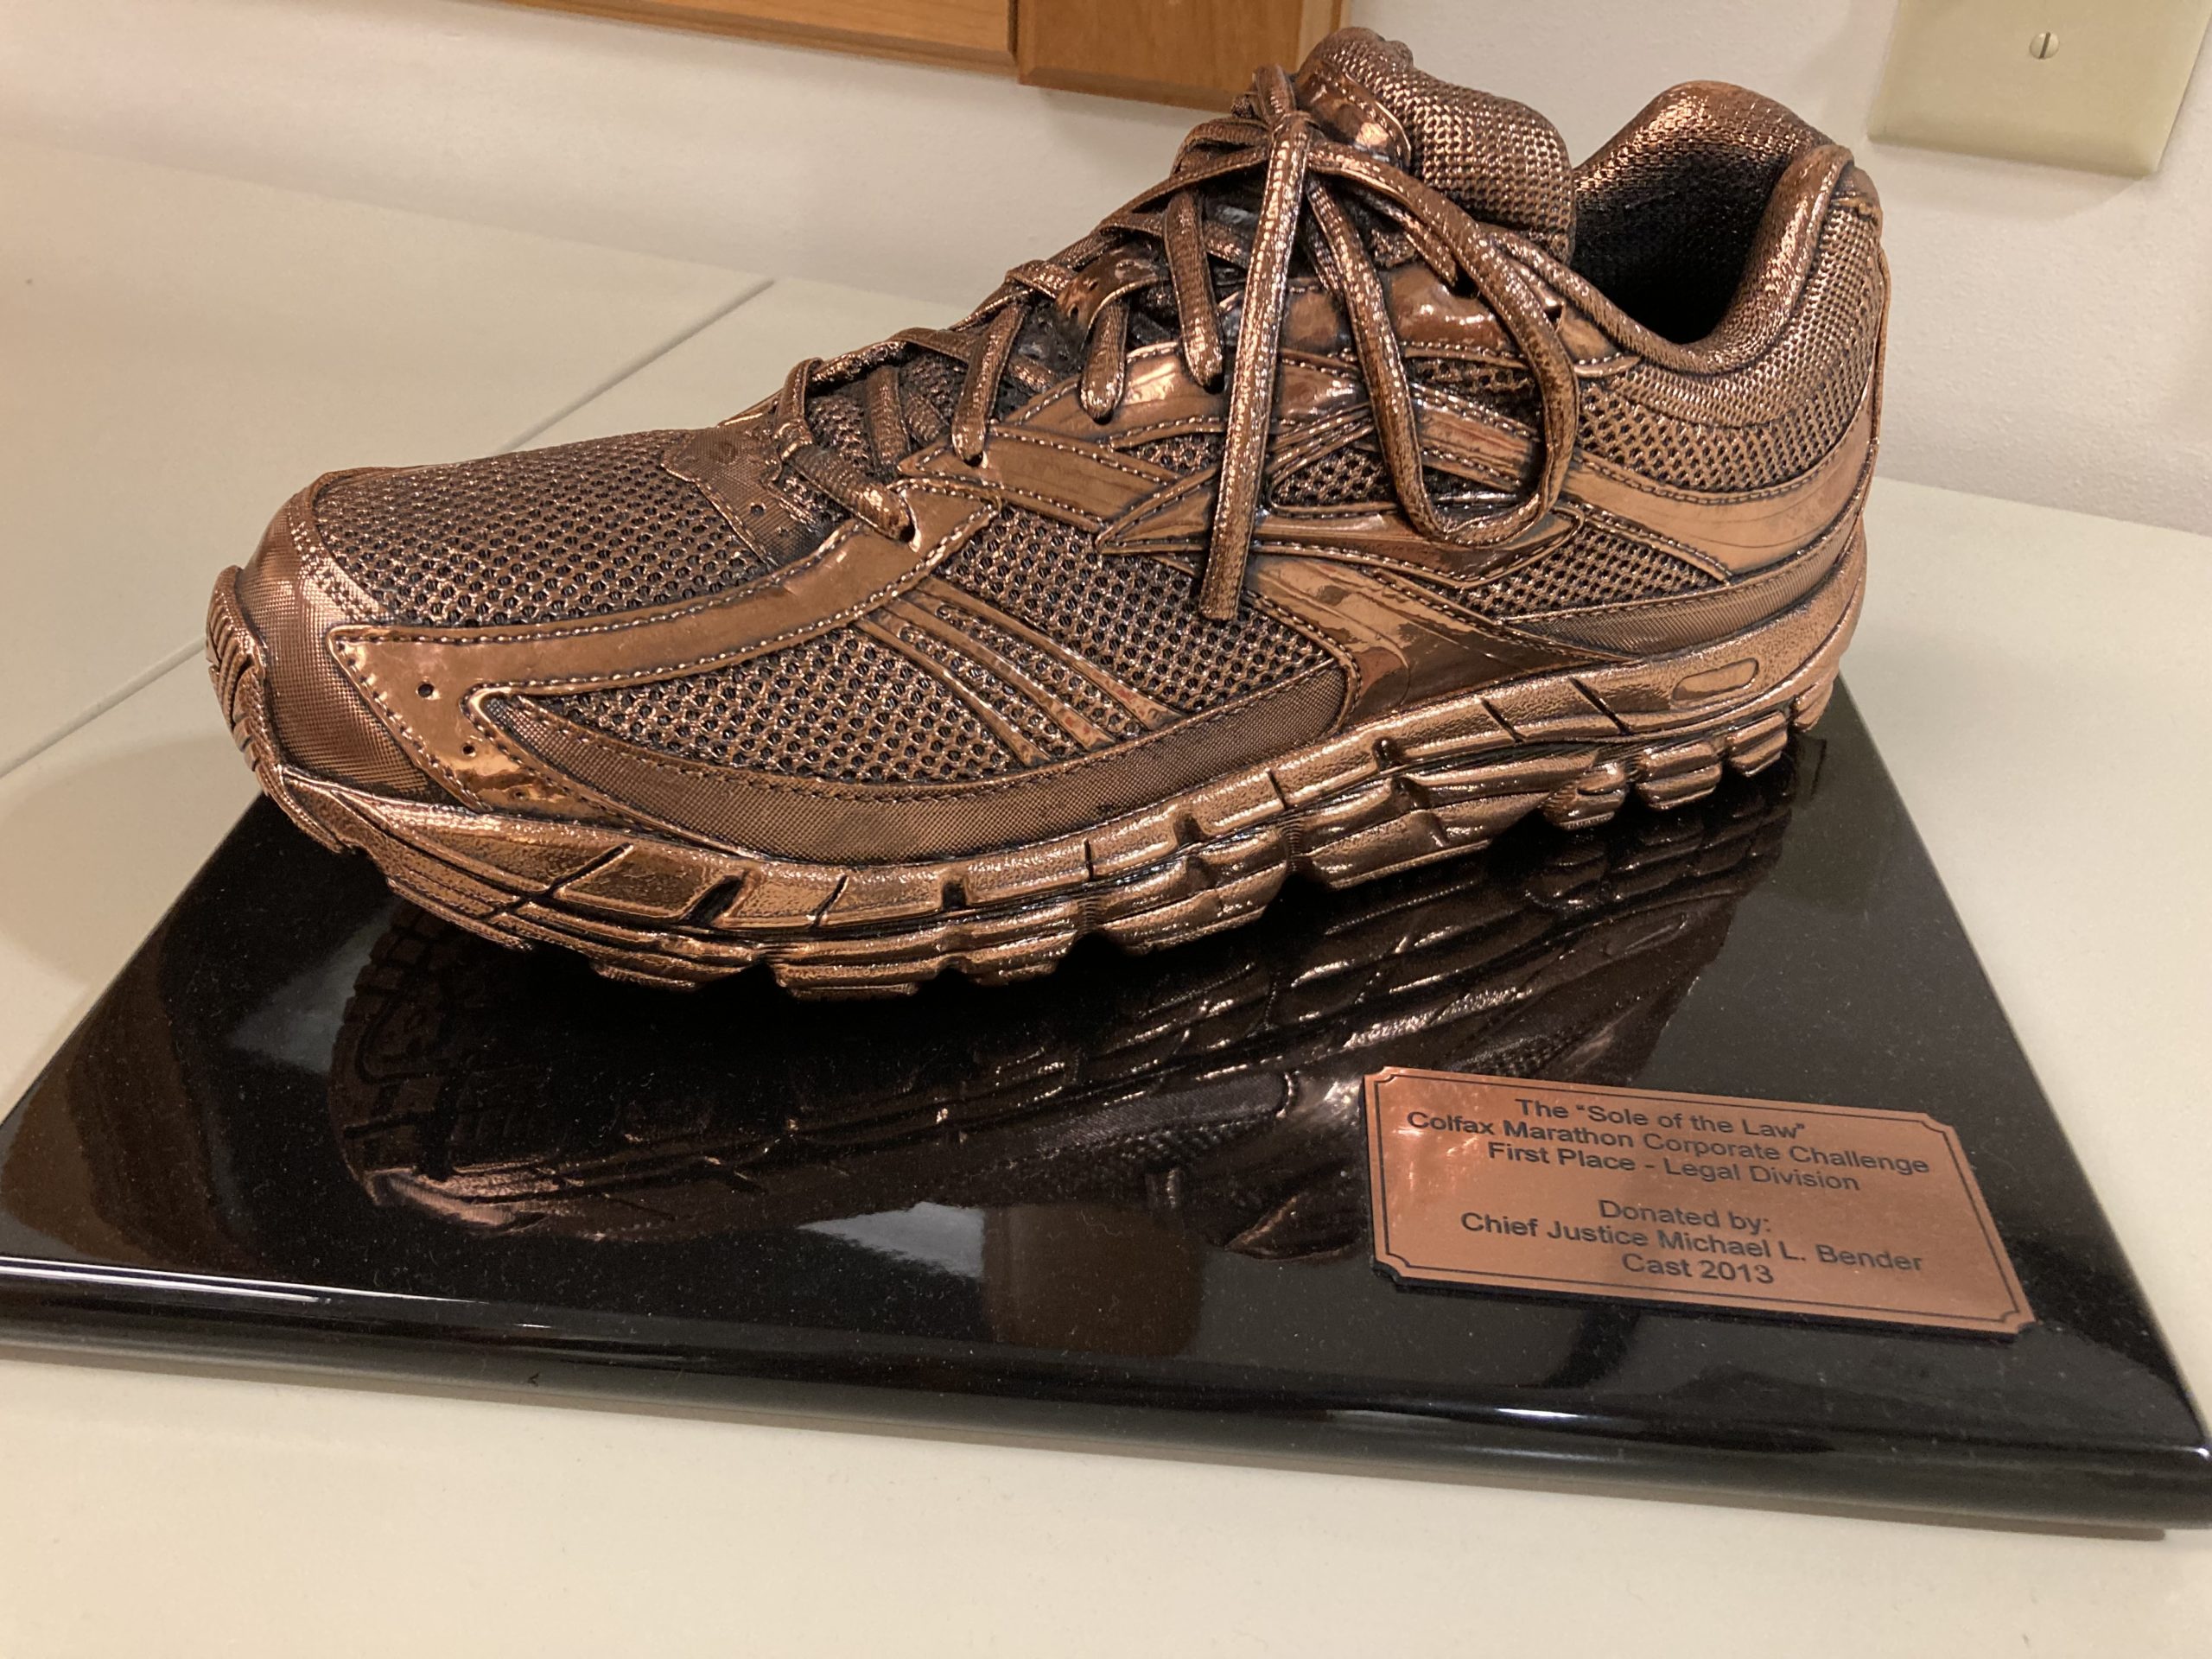 a massive bronzed running shoe sits on a plaque as part of a trophy for the winner of the legal division of the Colfax Marathon.